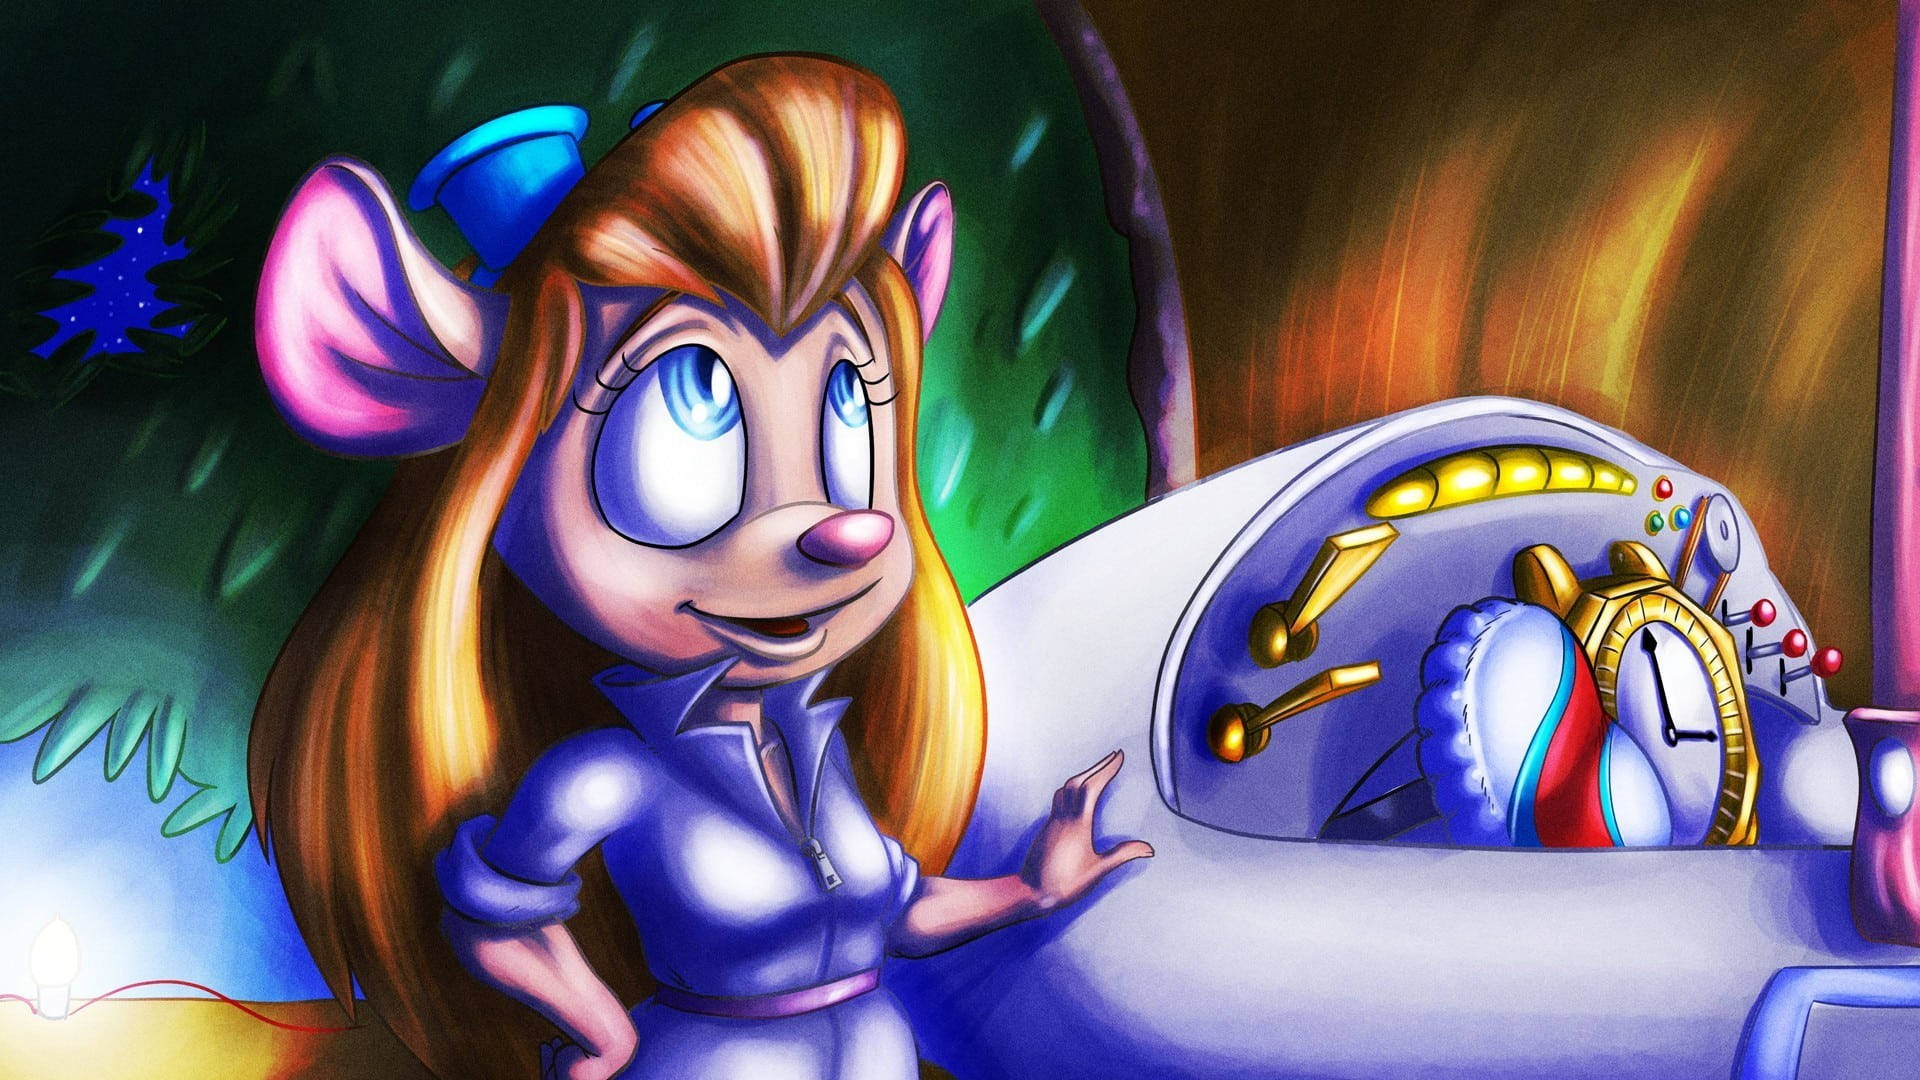 Beautiful Gadget Hackwrench From Chip N Dale Rescue Rangers Picture